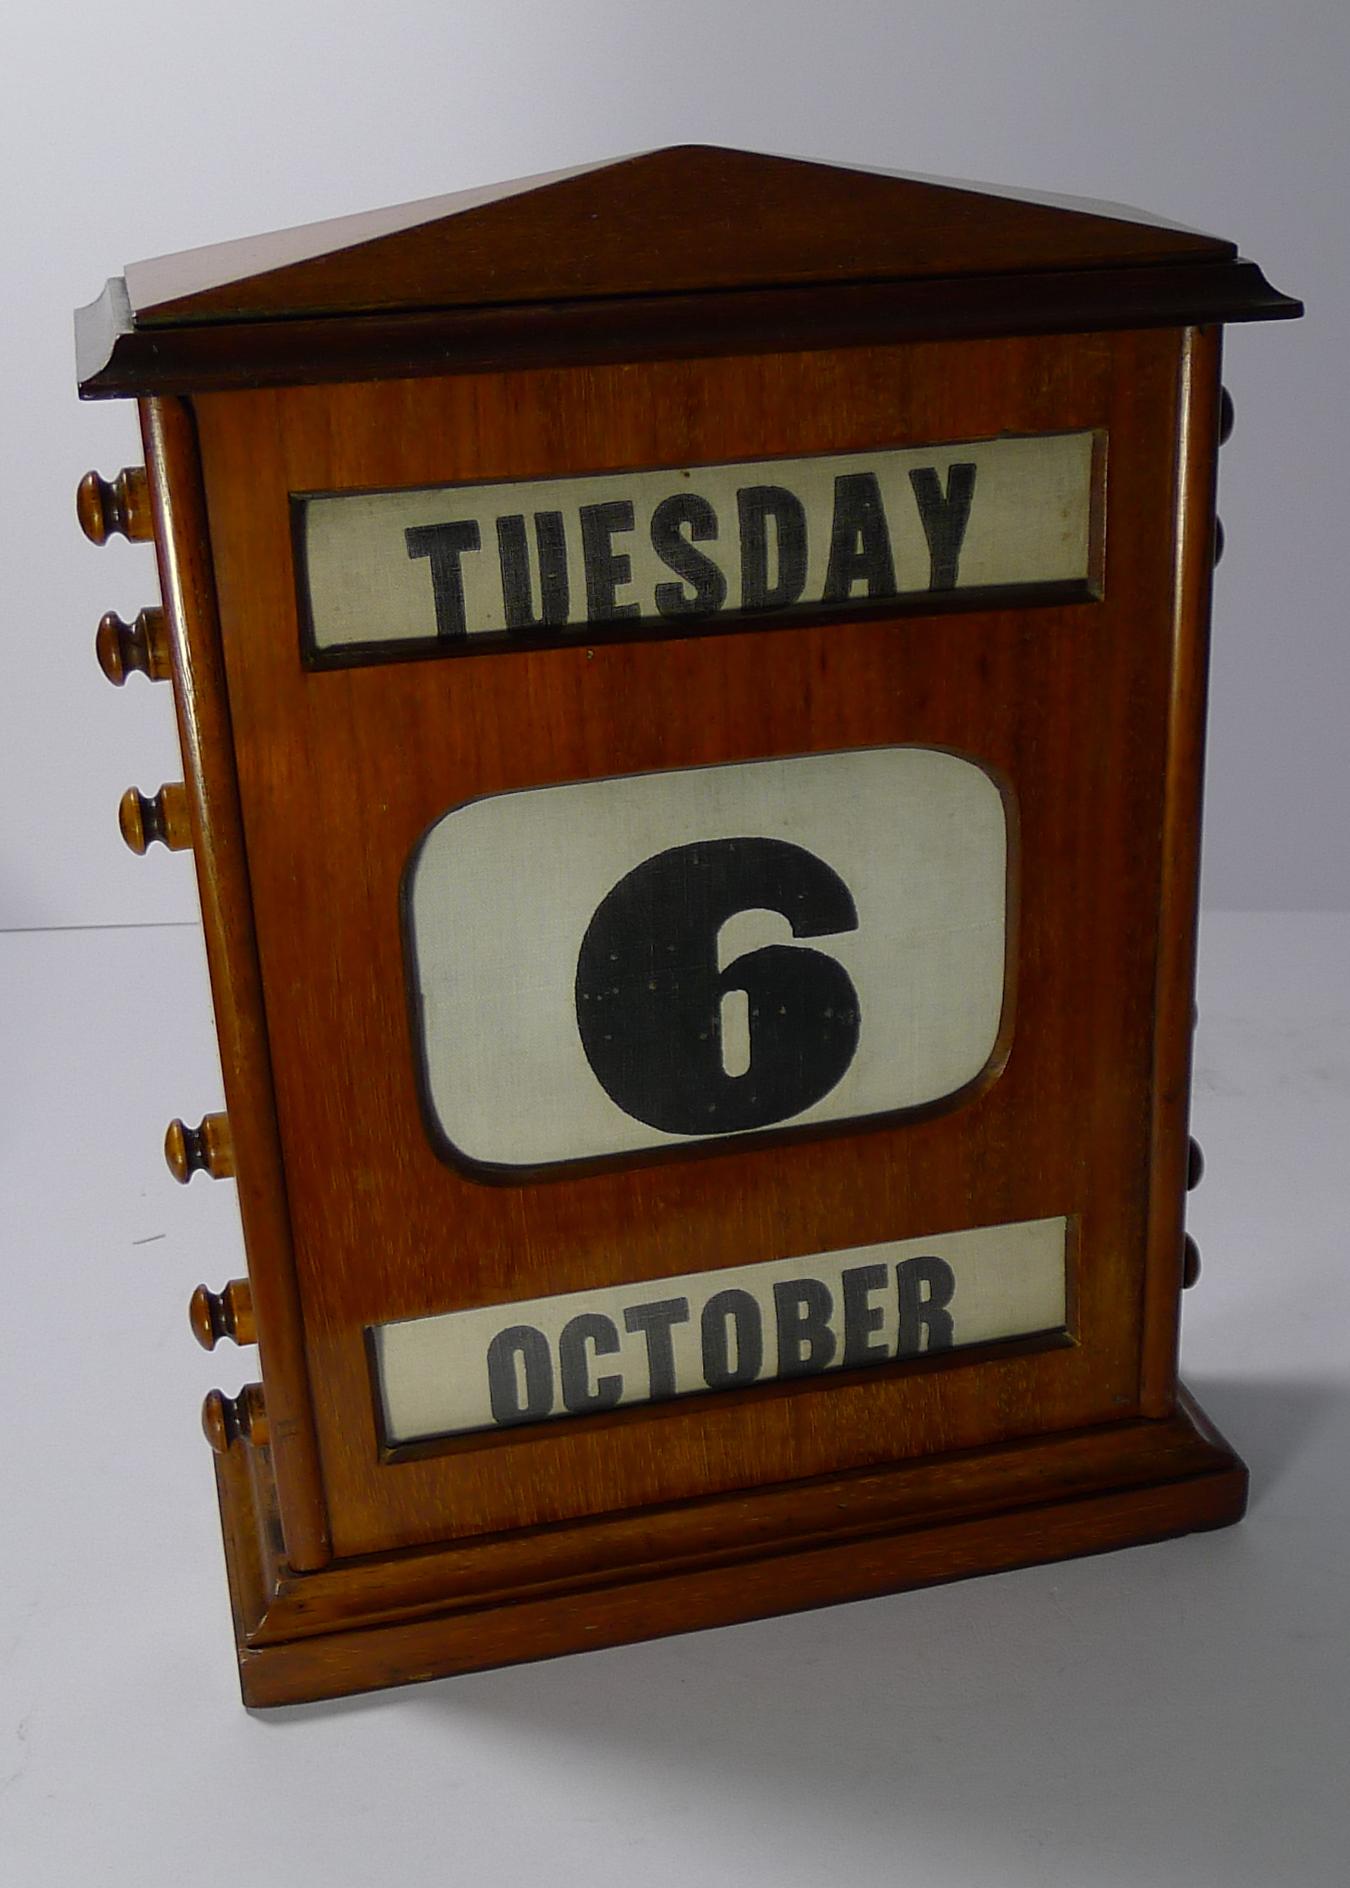 It's been some time since I have had a calendar this size and even better being in sought-after mahogany.

The four knobs to each side are used to move forward and rewind the day, date and month behind the three glazed apertures. All in full